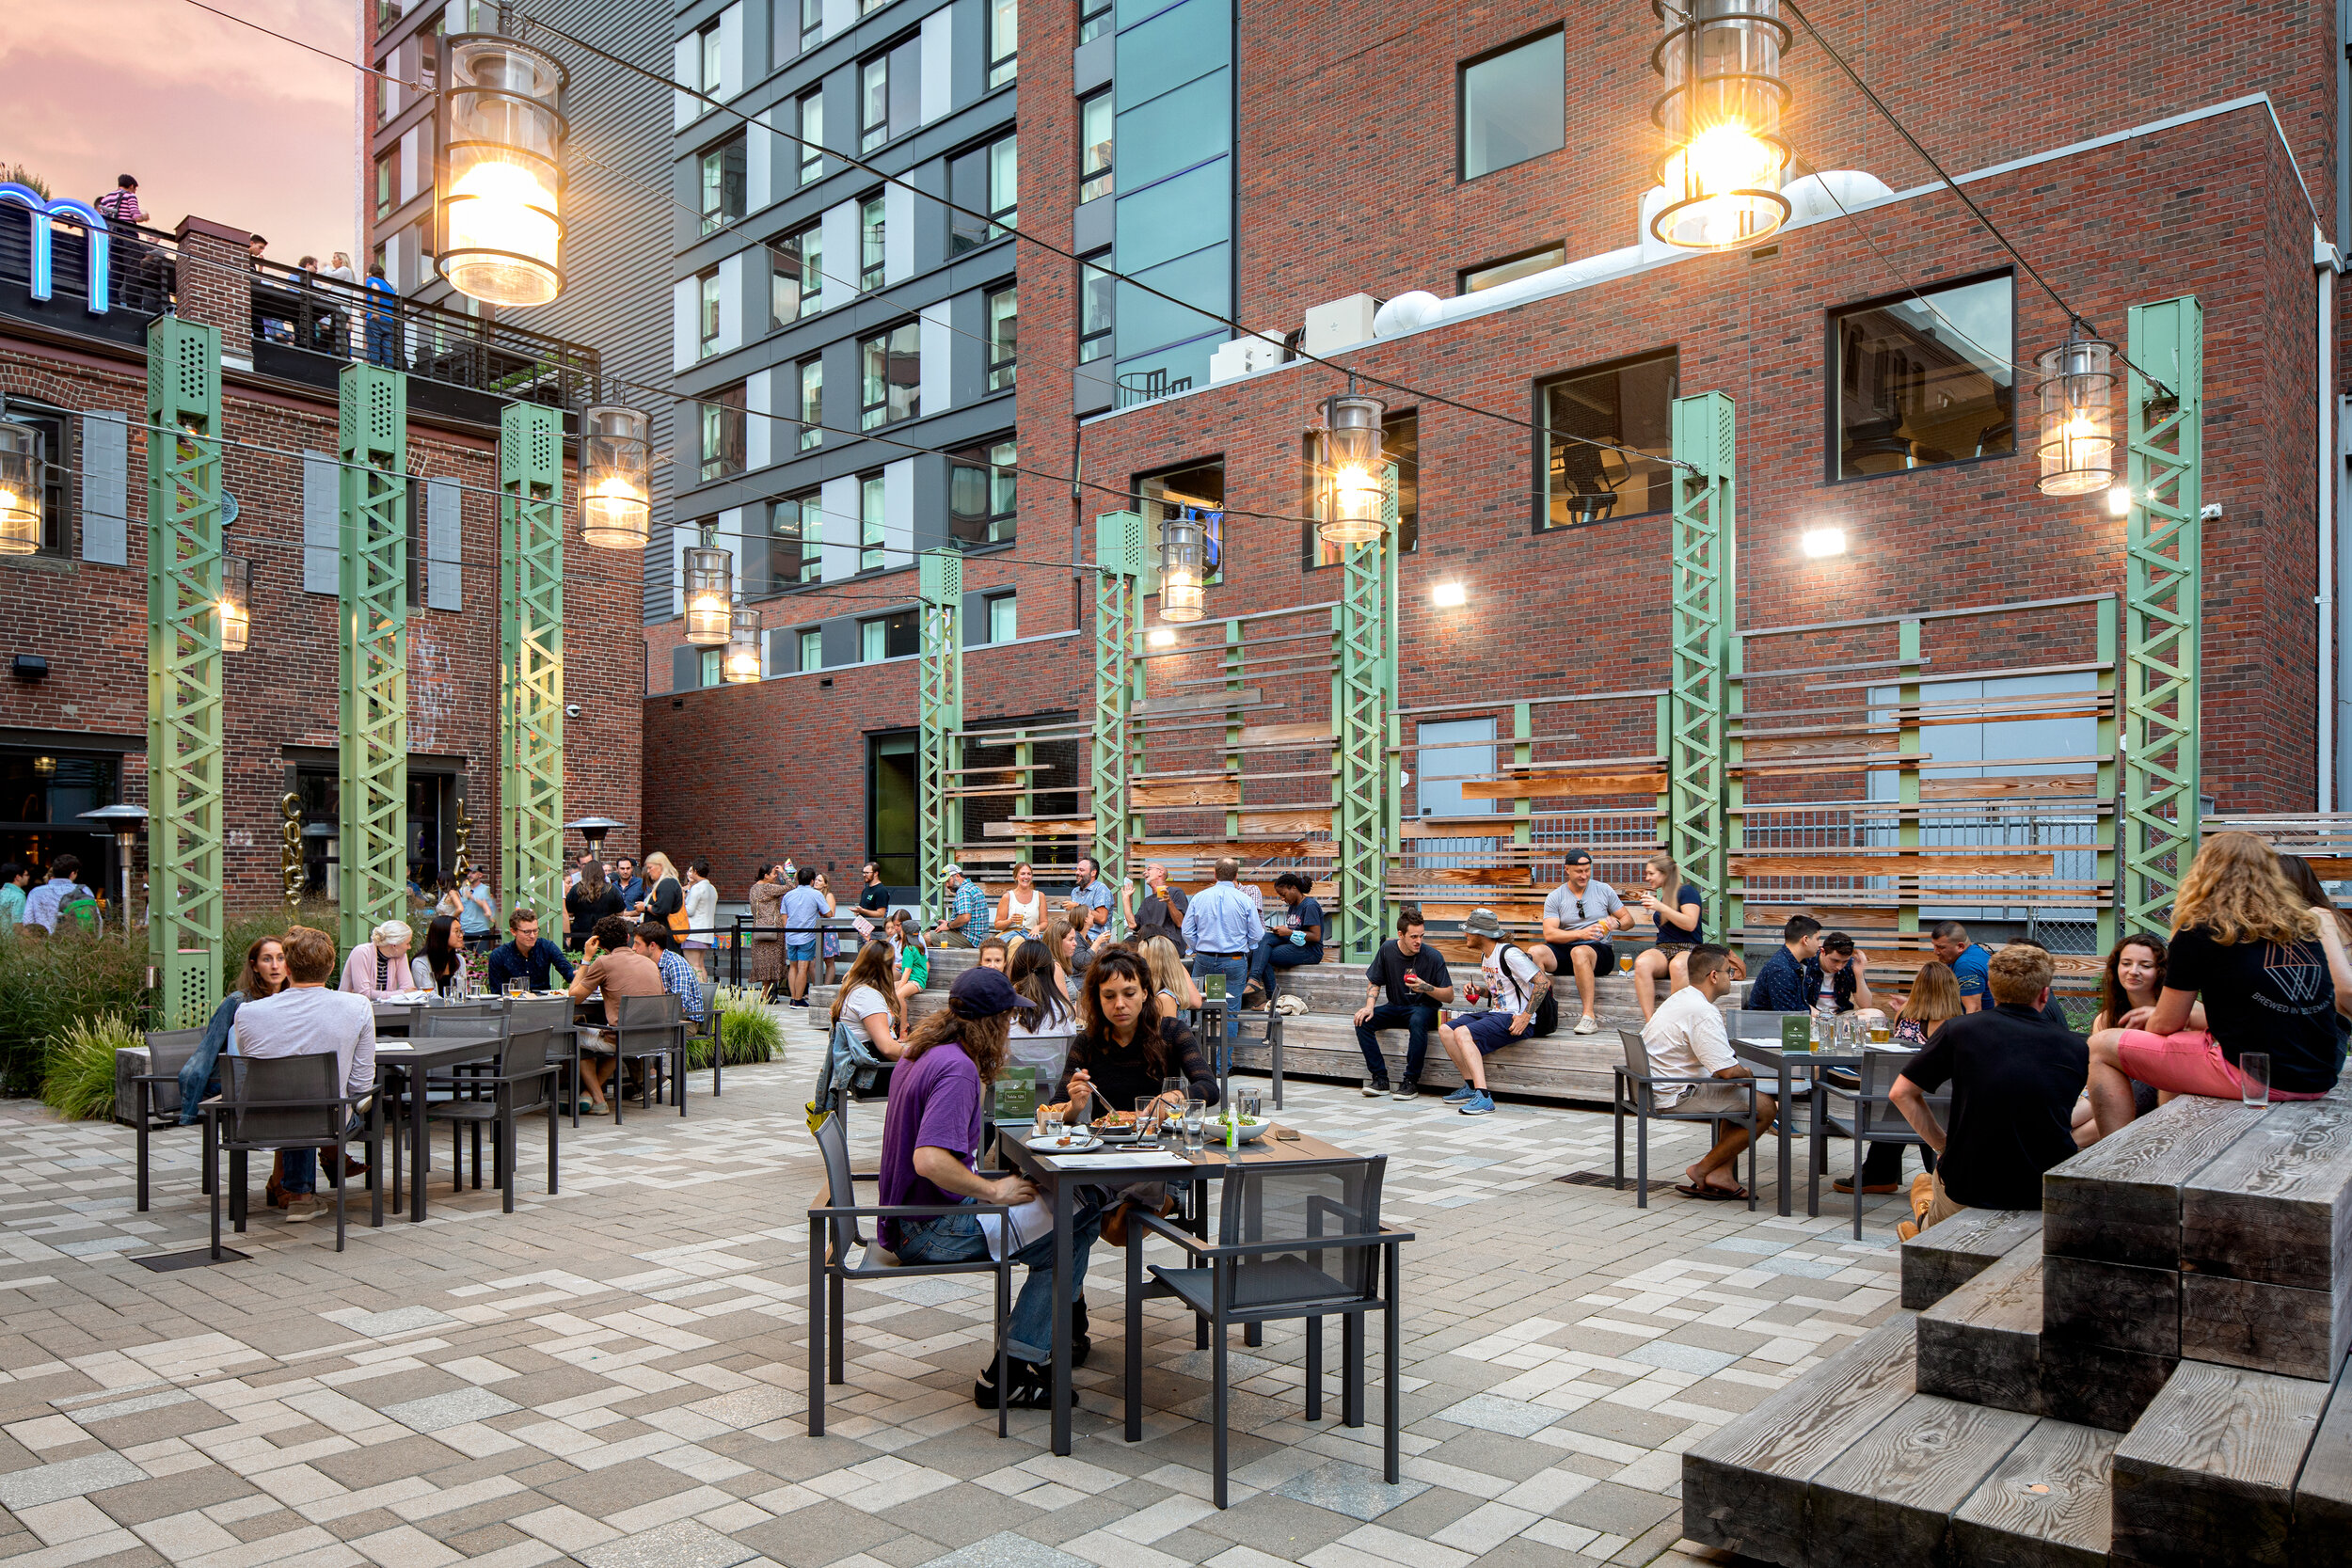  Lighting and Outdoor Seating at Thomson Place (Photo by Ed Wonsek) 